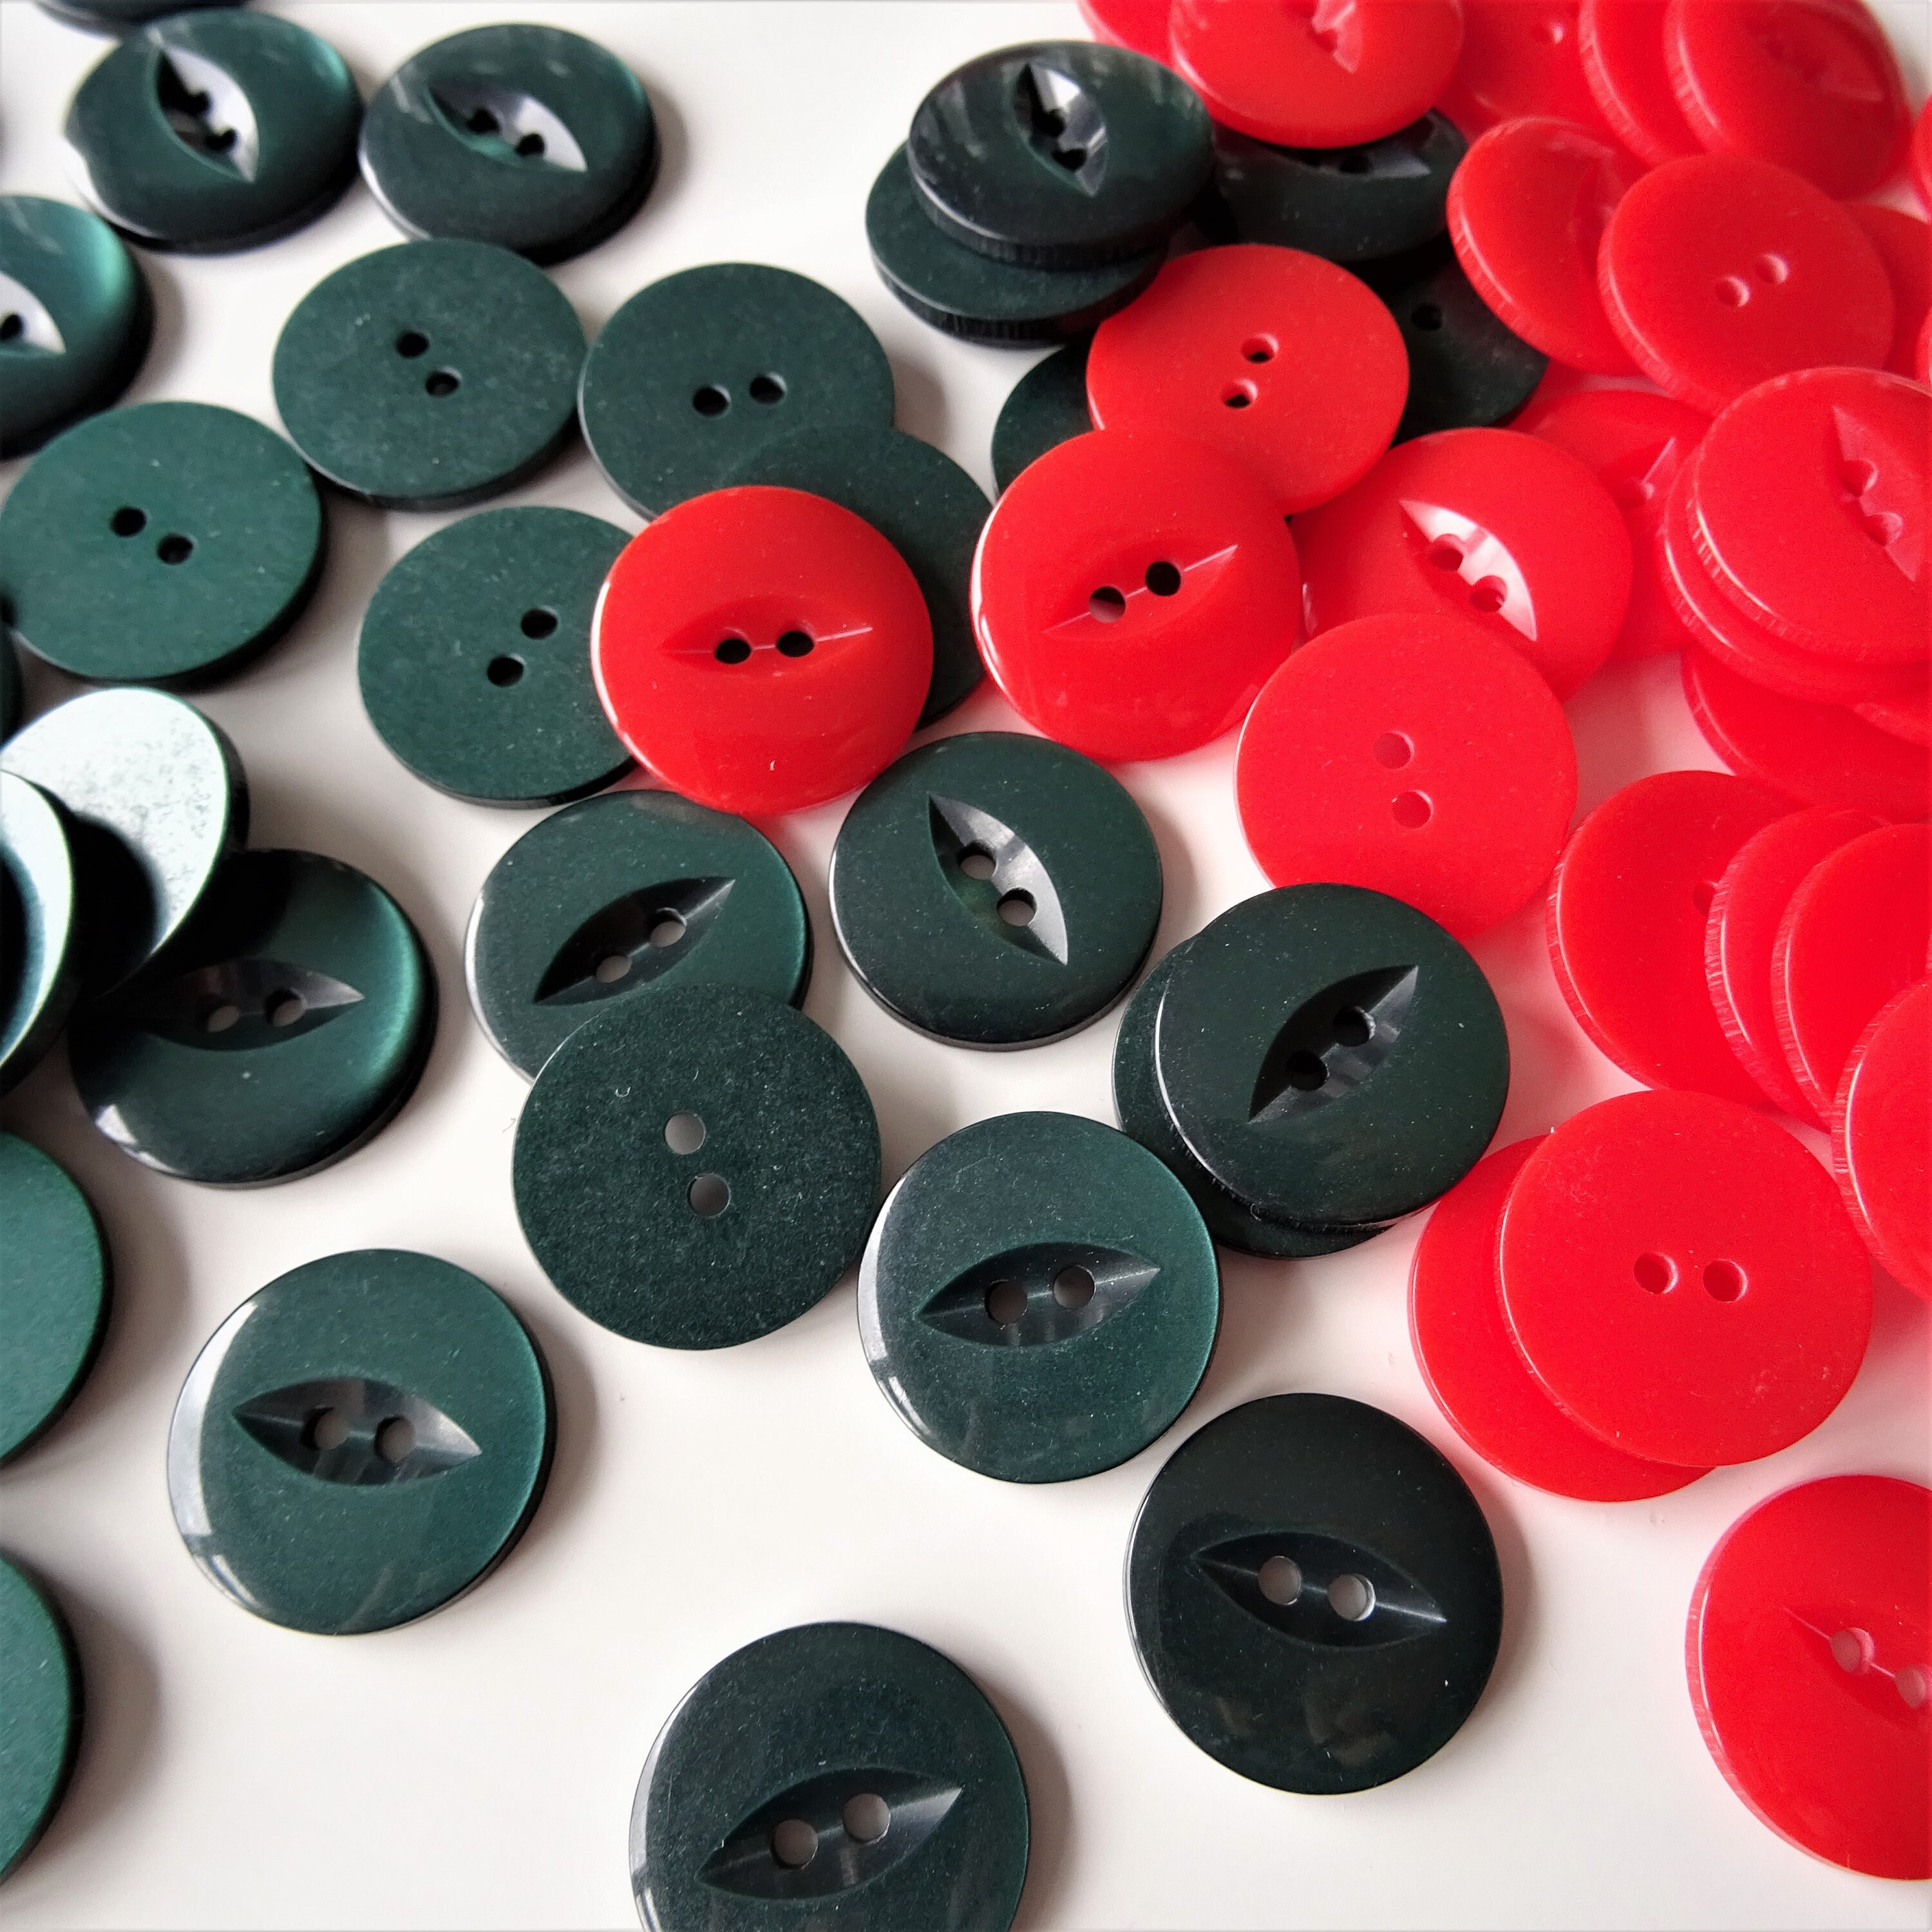 Wooden Handmade With Love Buttons, Round 15mm or 20mm 2 Hole Craft Buttons,  Pack of 6, 8, 10 or 12 